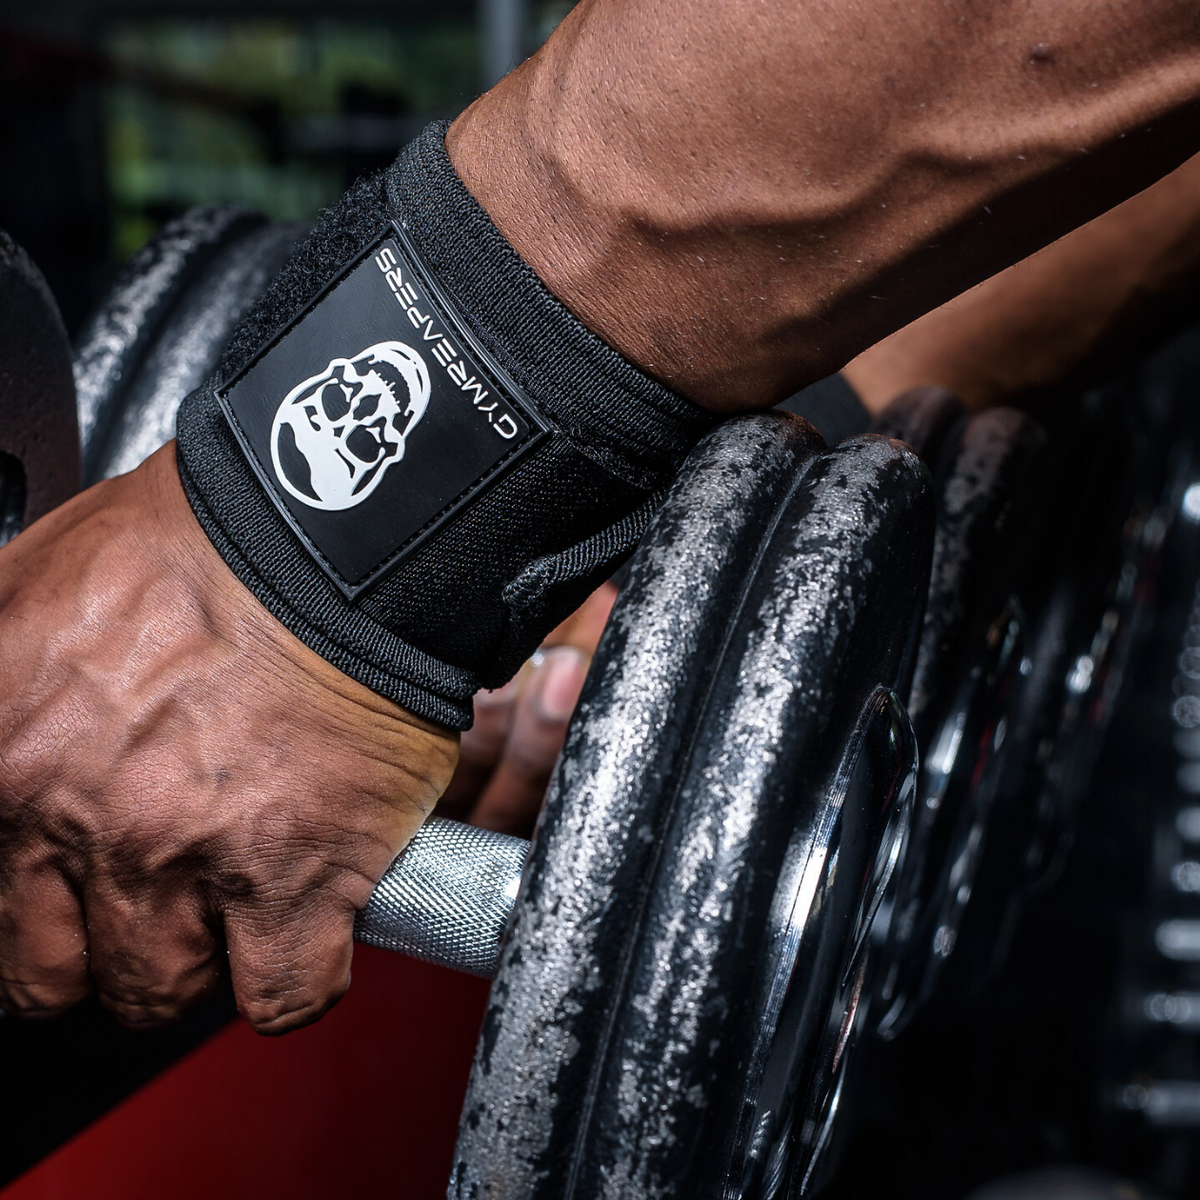 4 Tips For Wearing Wrist Wraps For Bench Press & Do They Help